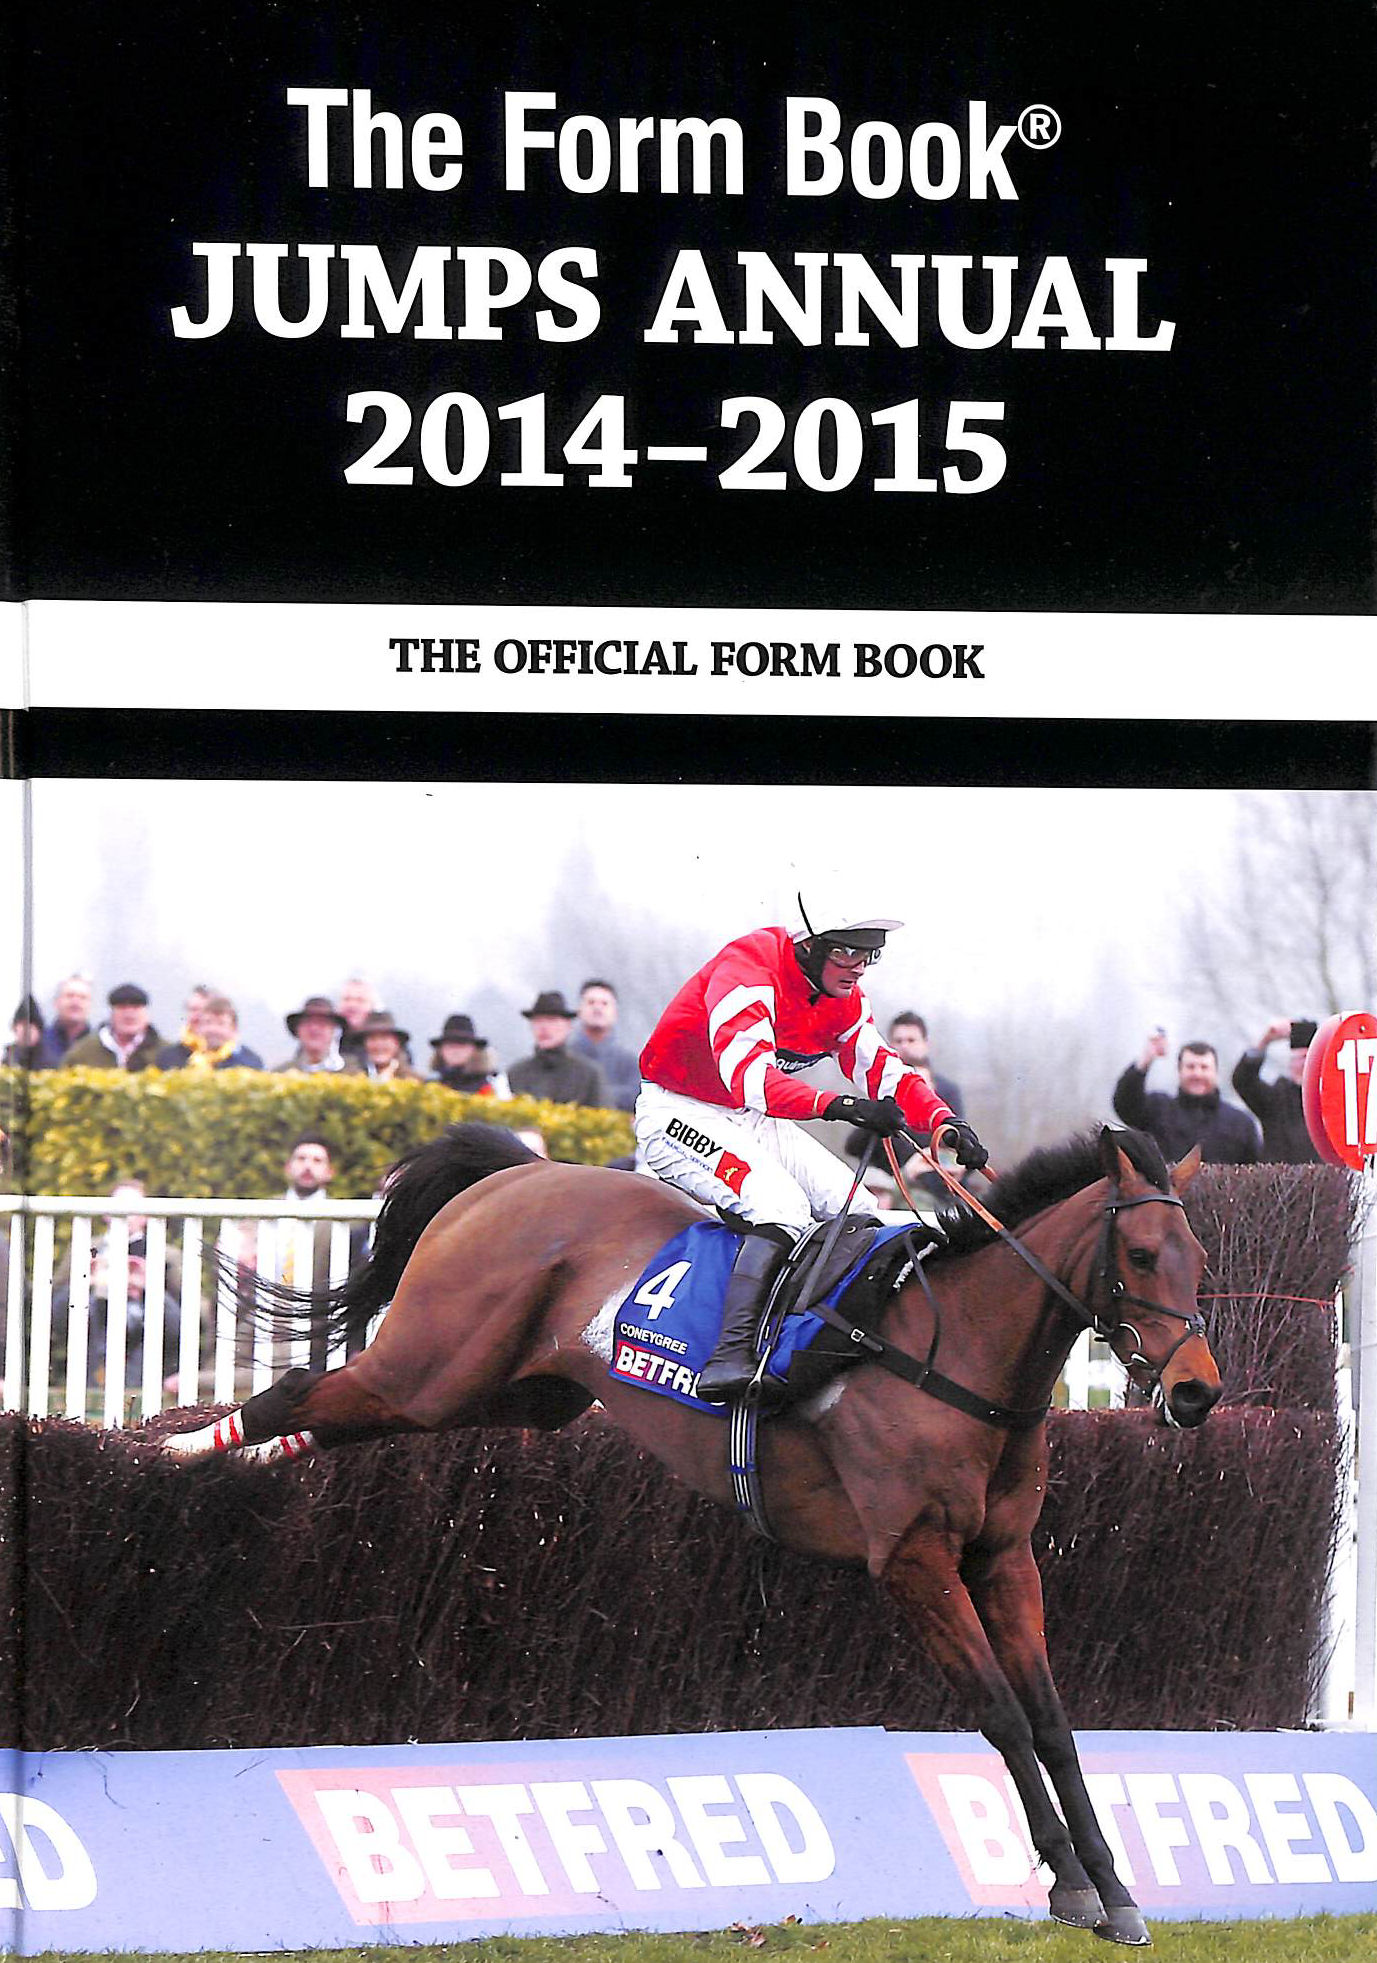 EDITED BY GRAHAM DENCH - The Form Book Jumps Annual 2014-2015